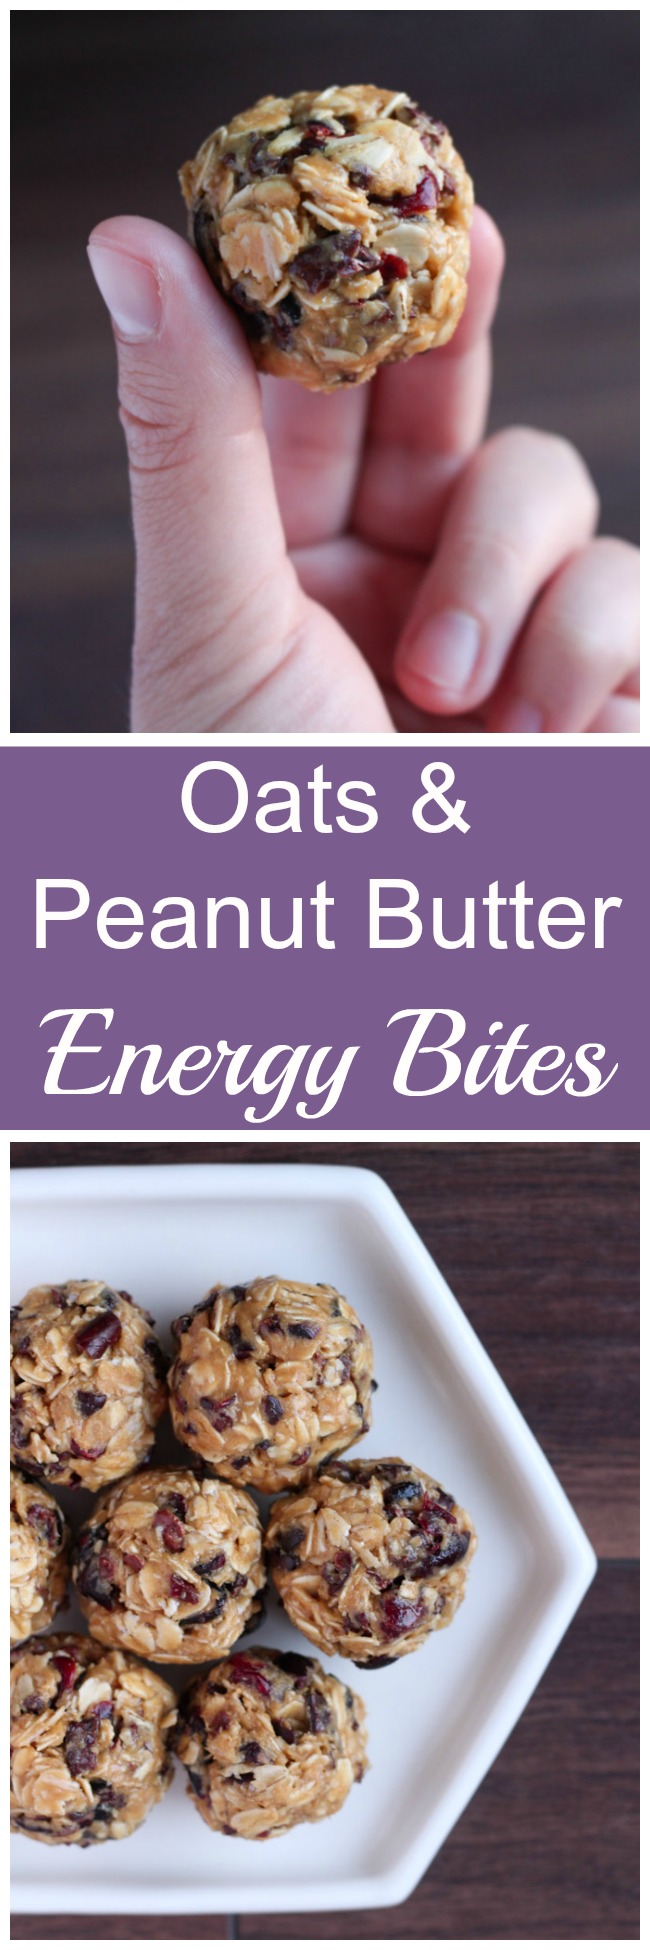 This recipe for no-bake, oats and peanut butter energy bites are satisfying and delicious snacks any time. Stir in dried fruit like cranberries, crunchy bits like nuts or cocoa nibs, and sweet treats like m&m's and you have a customized treat! www.cookingismessy.com